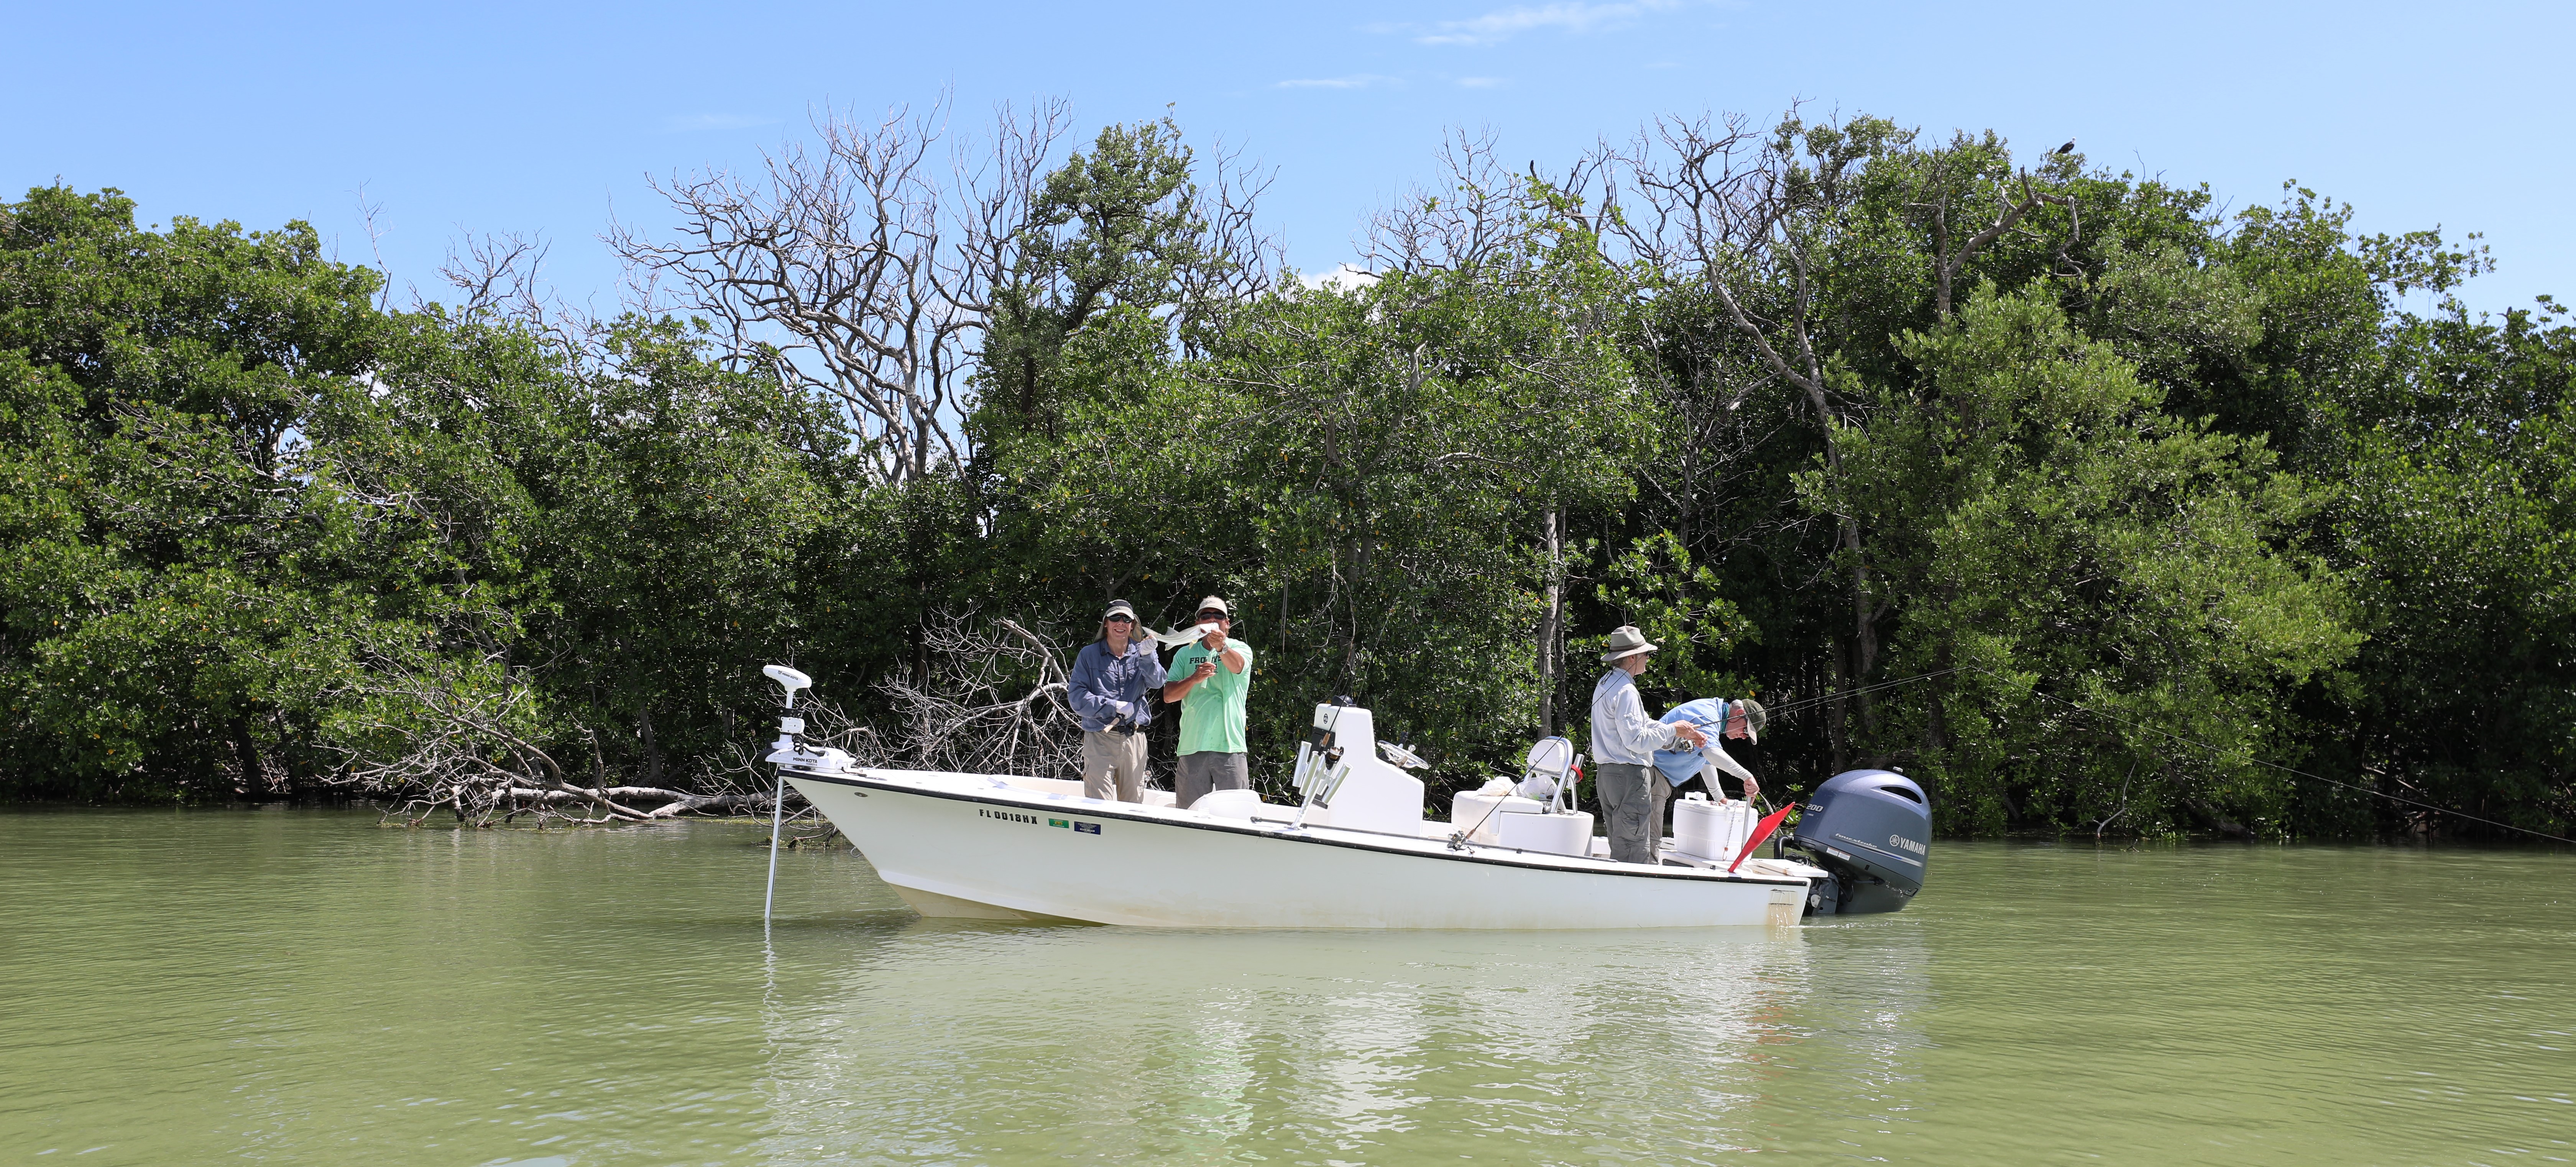 https://www.nps.gov/ever/planyourvisit/images/Fishing-in-Fl-Bay-NPS-Photo-by-M.JPG